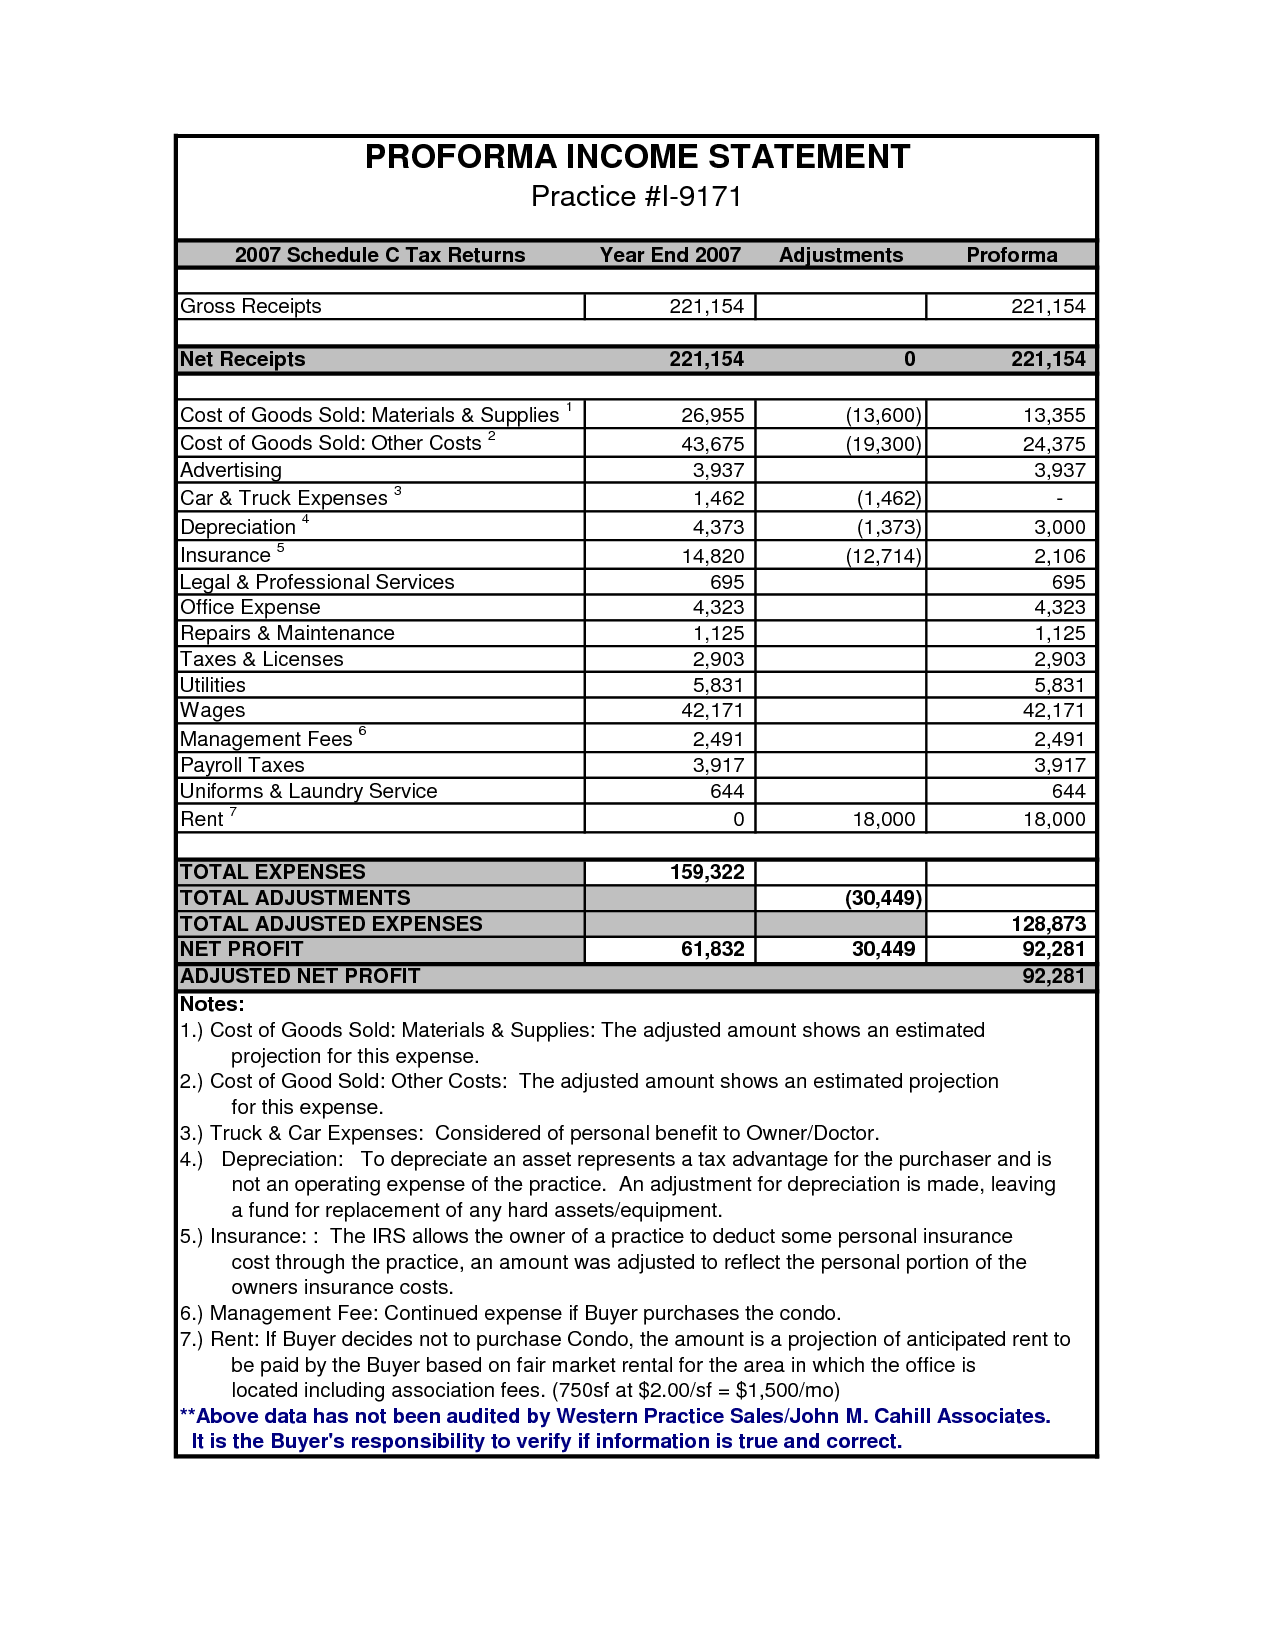 Cost of Goods Income Statement Image